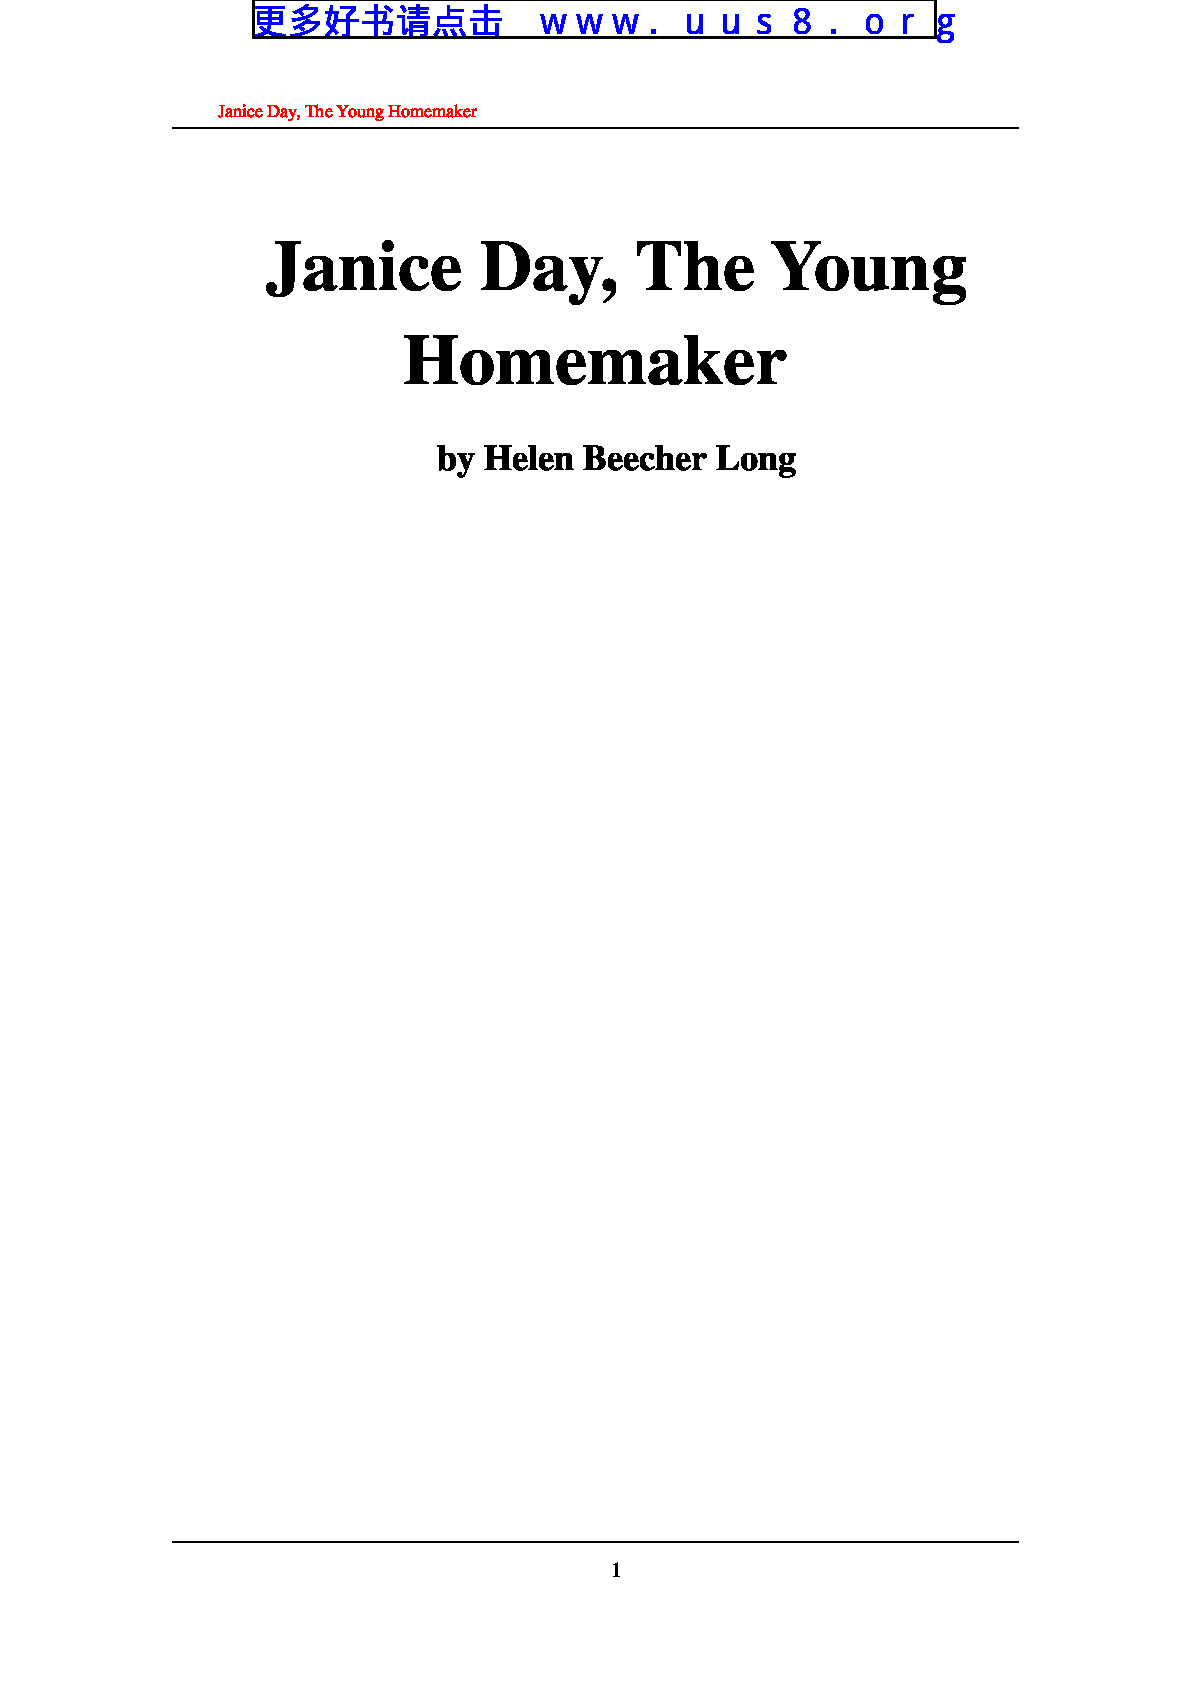 Janice_Day,_The_Young_Homemaker(年轻的持家人)